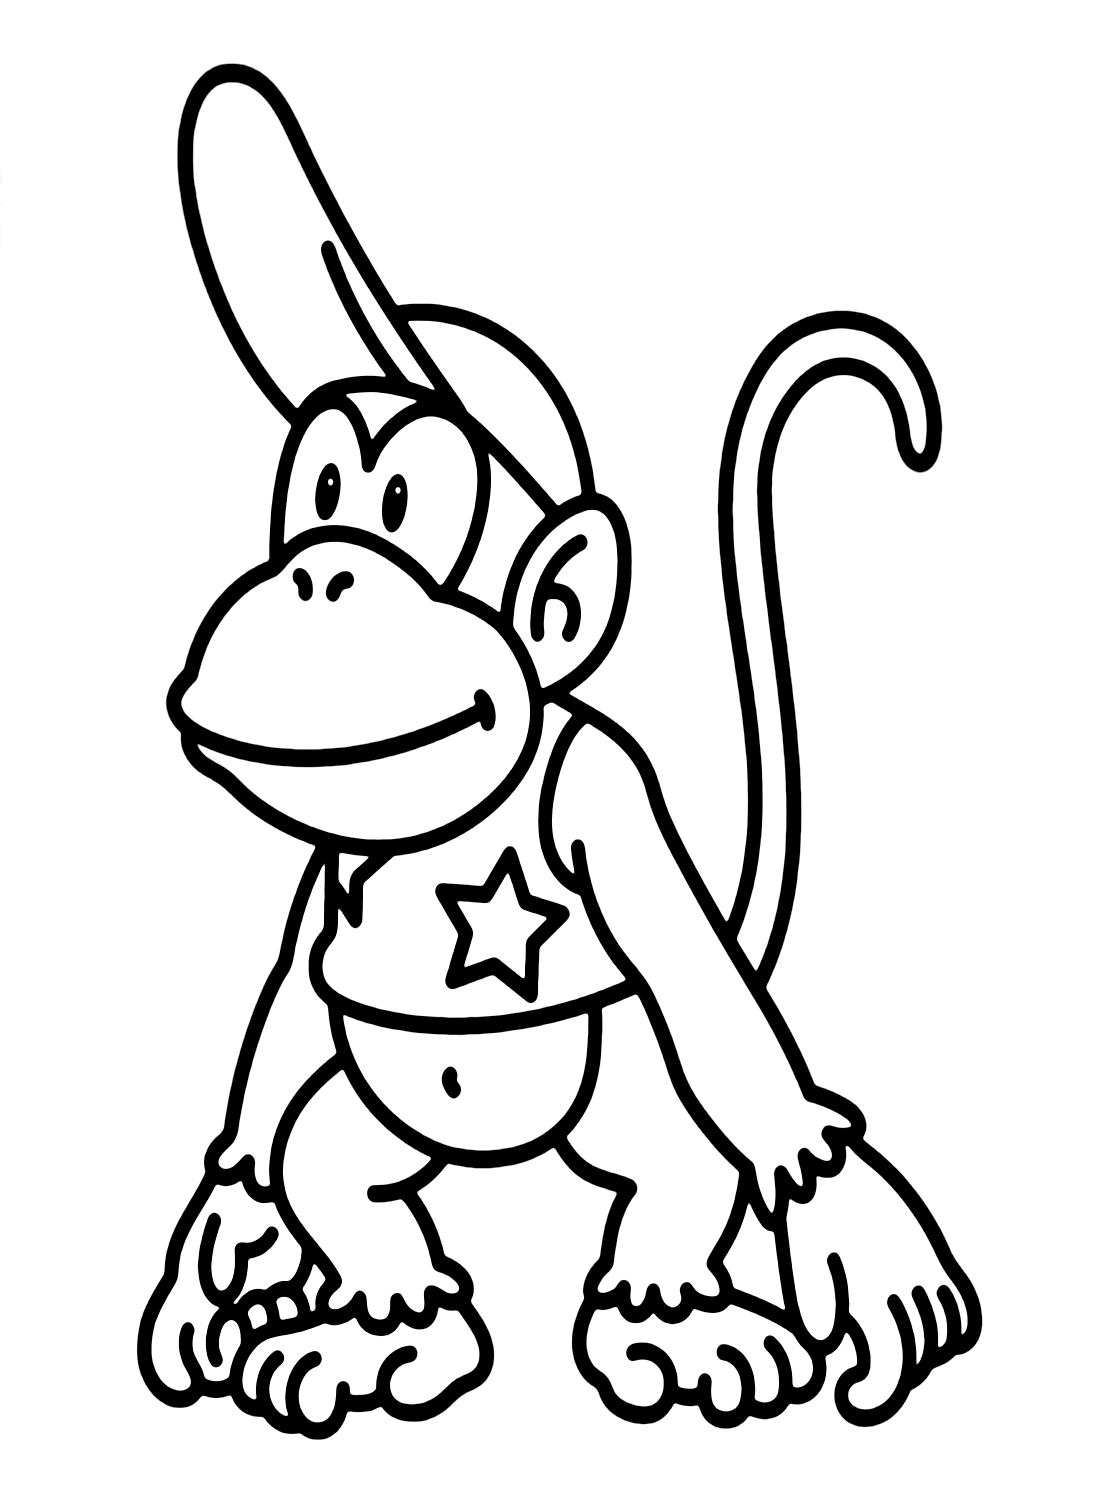 Lindo Diddy Kong de Diddy Kong